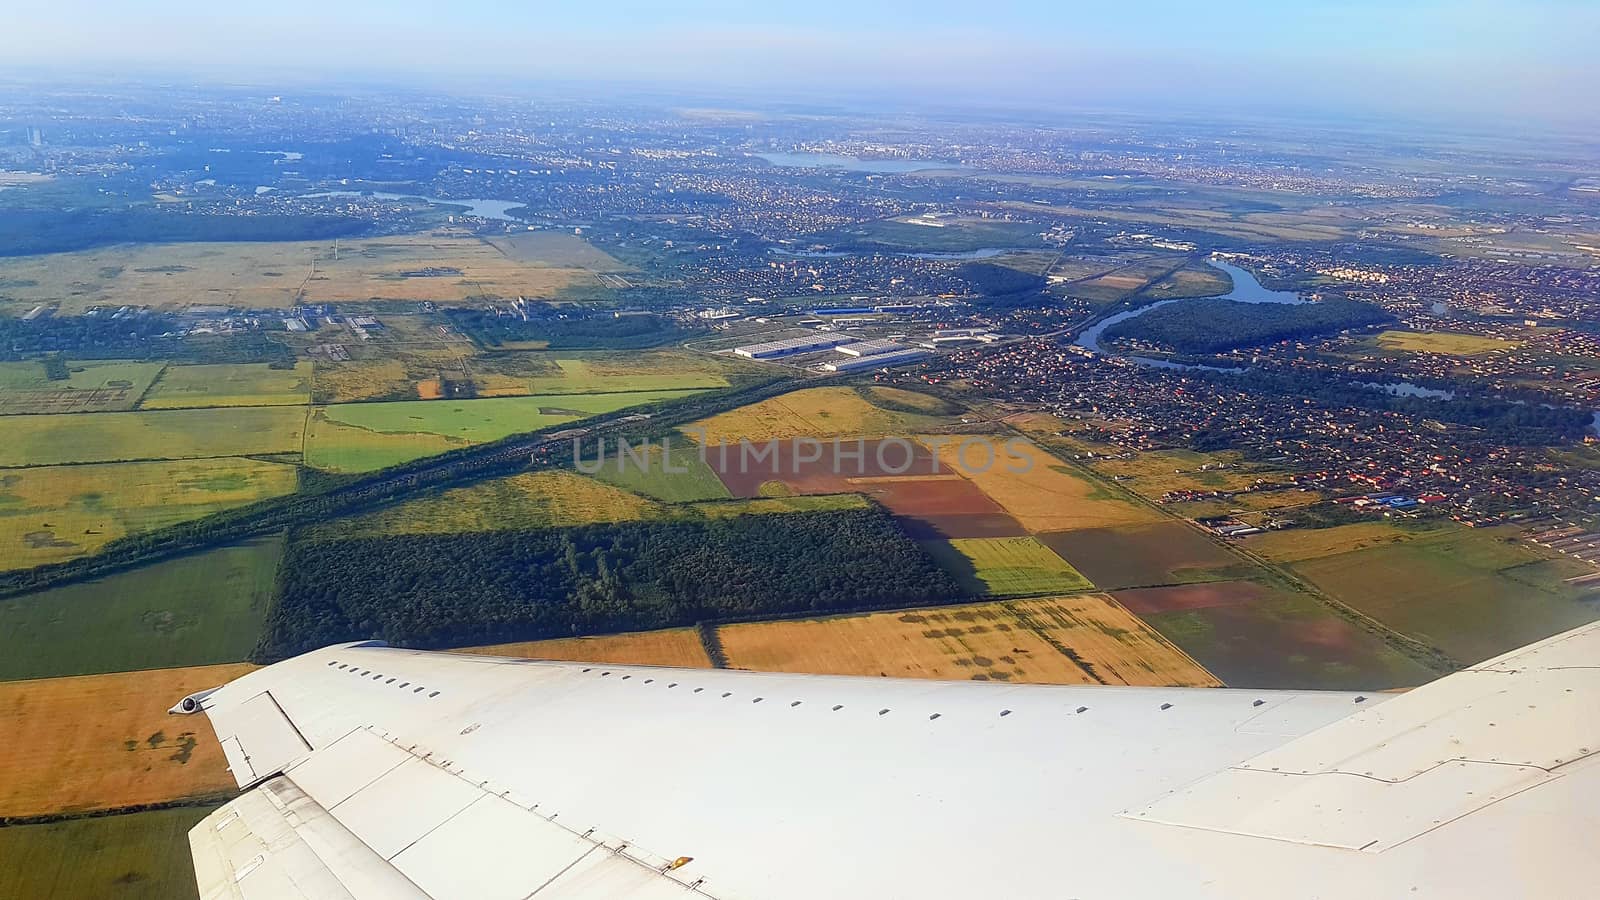 The wing of the plane taking off from Bucharest, aerial view of north of Bucharest